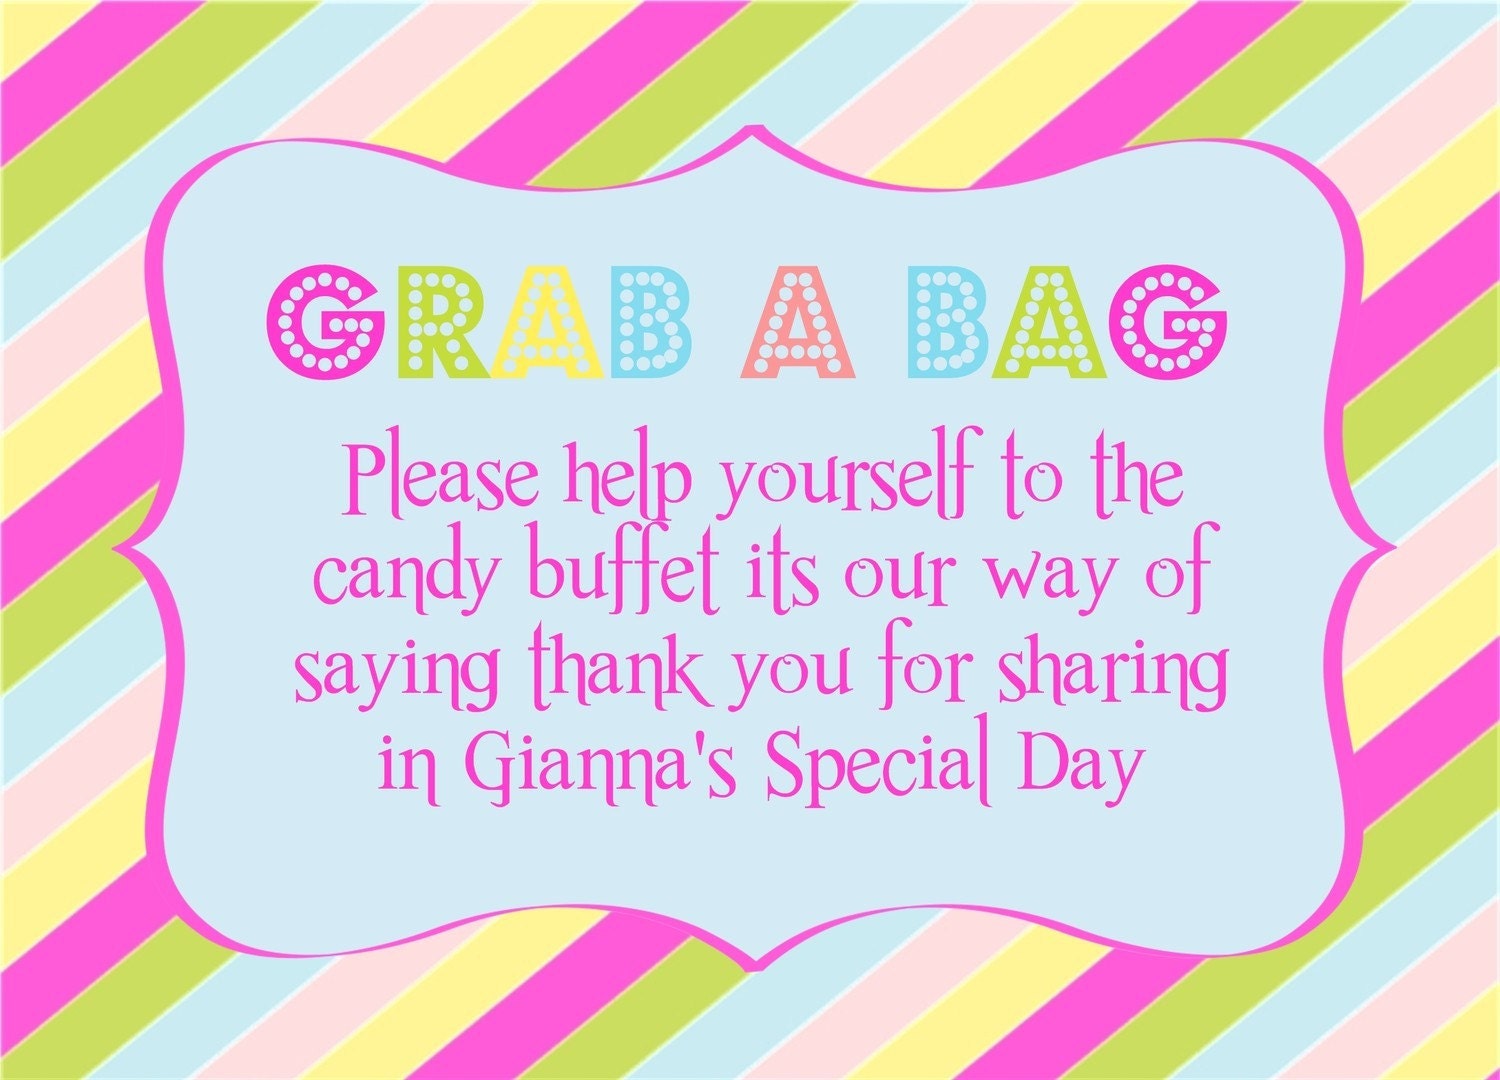 Candy Buffet Signs Printable Free